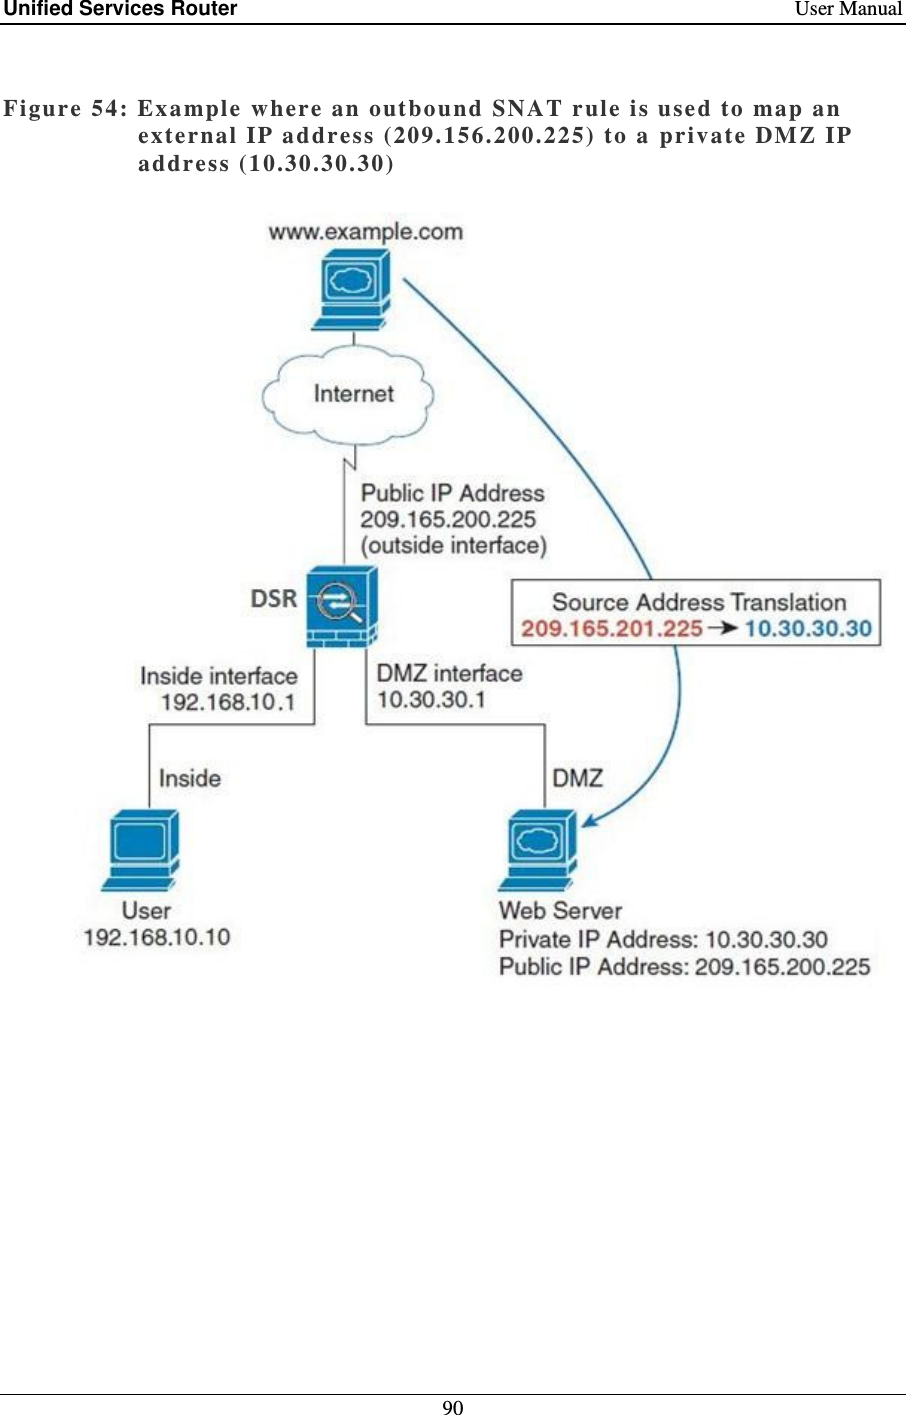 Unified Services Router    User Manual 90   Figure 54: Ex ample  where an out bo und  SNAT rule is used to  map an external IP address (209.156.200.225)  to  a  private DMZ IP  address (10.30.30. 30 )         